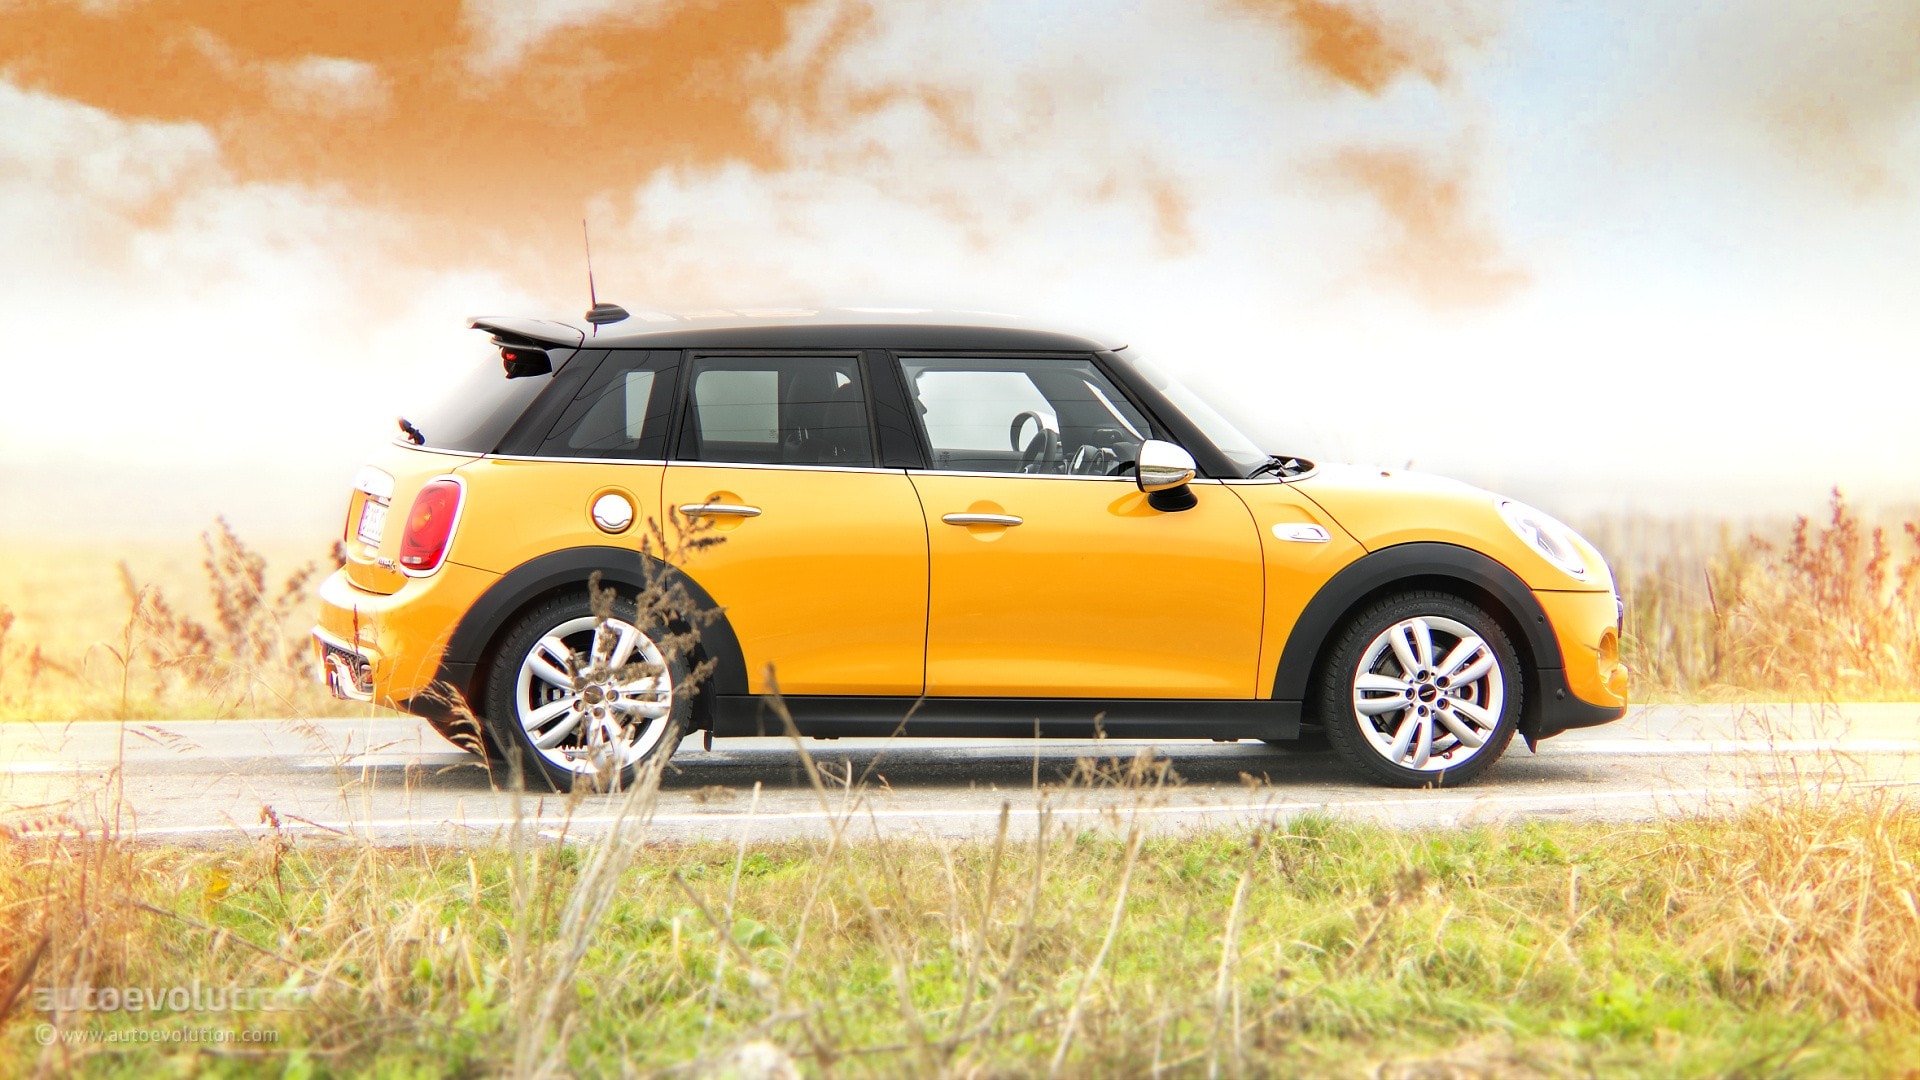 MINI Cooper S 5-Door - Your Funky HD Wallpapers Are Served - autoevolution